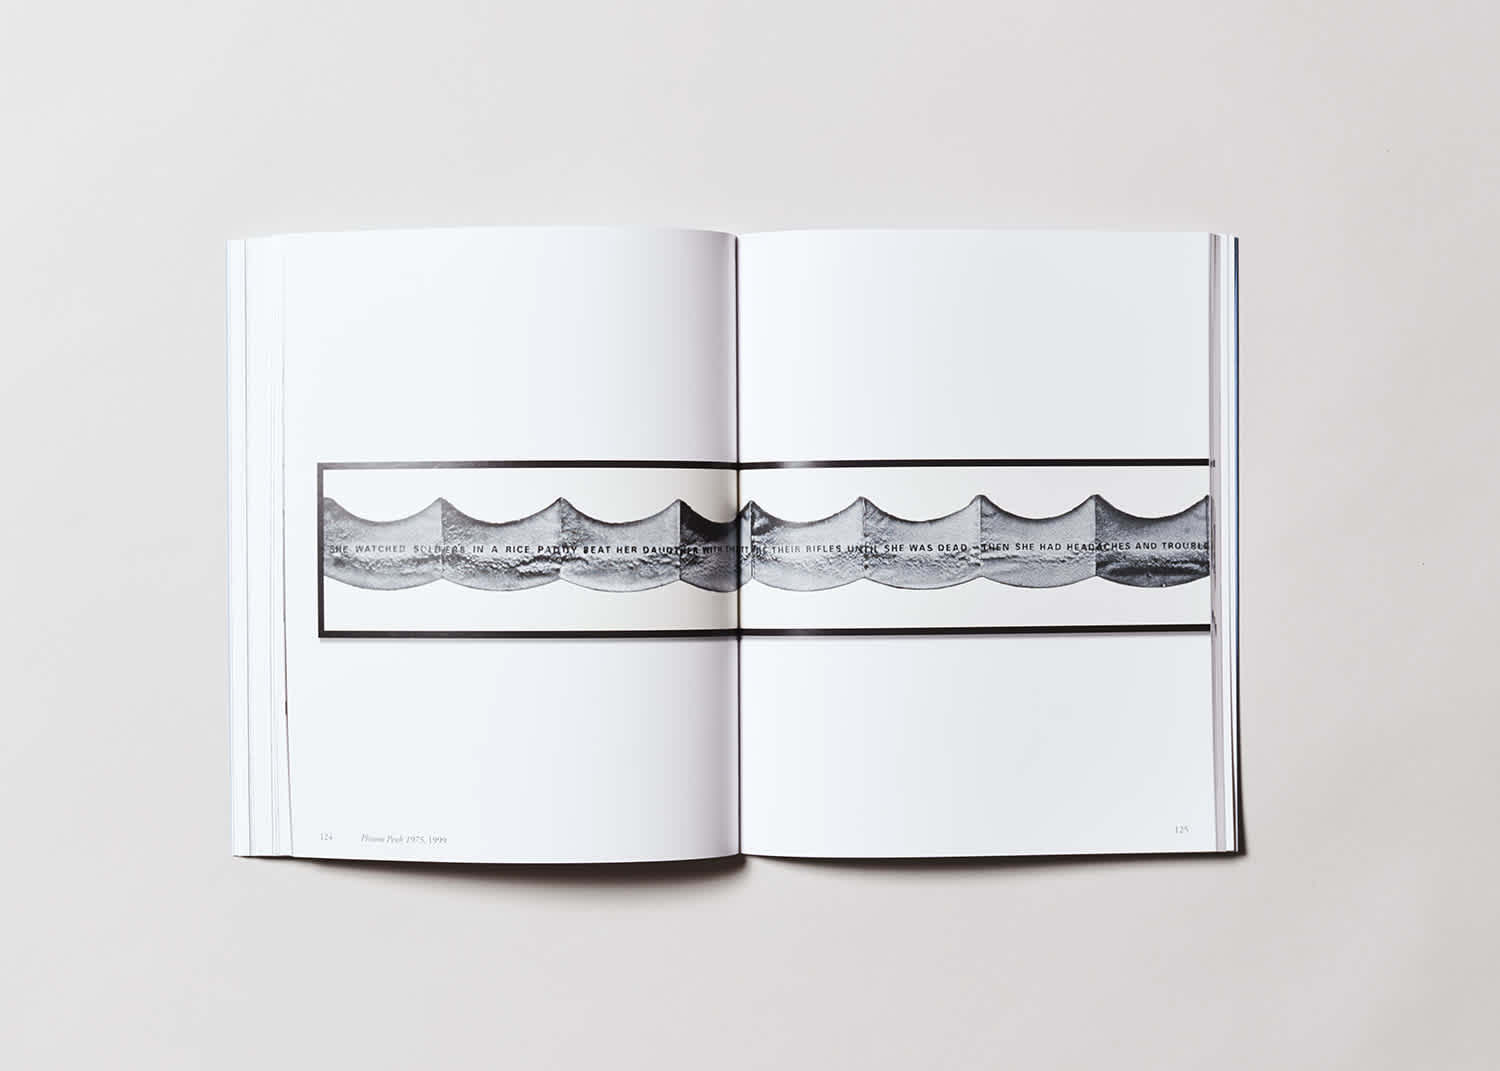 An open book with a long, framed artwork stretching across the center of both pages.